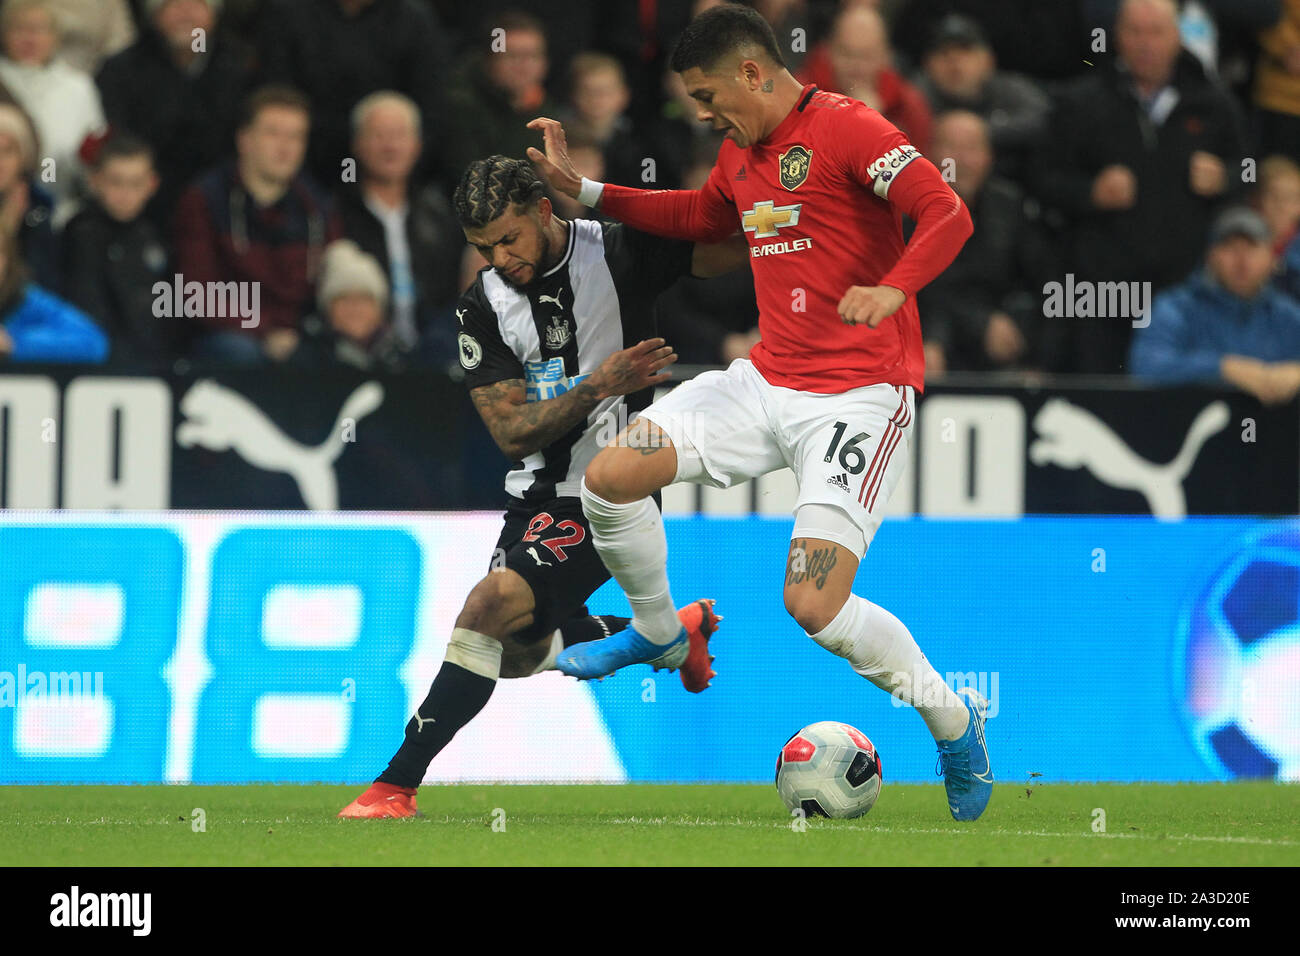 NEWCASTLE UPON TYNE, OCTOBER 6th DeAndre Yedlin of Newcastle United in action with Marcos Rojo of Manchester United during the Premier League match between Newcastle United and Manchester United at St. James's Park, Newcastle on Sunday 6th October 2019. (Credit: Mark Fletcher | MI News) Stock Photo